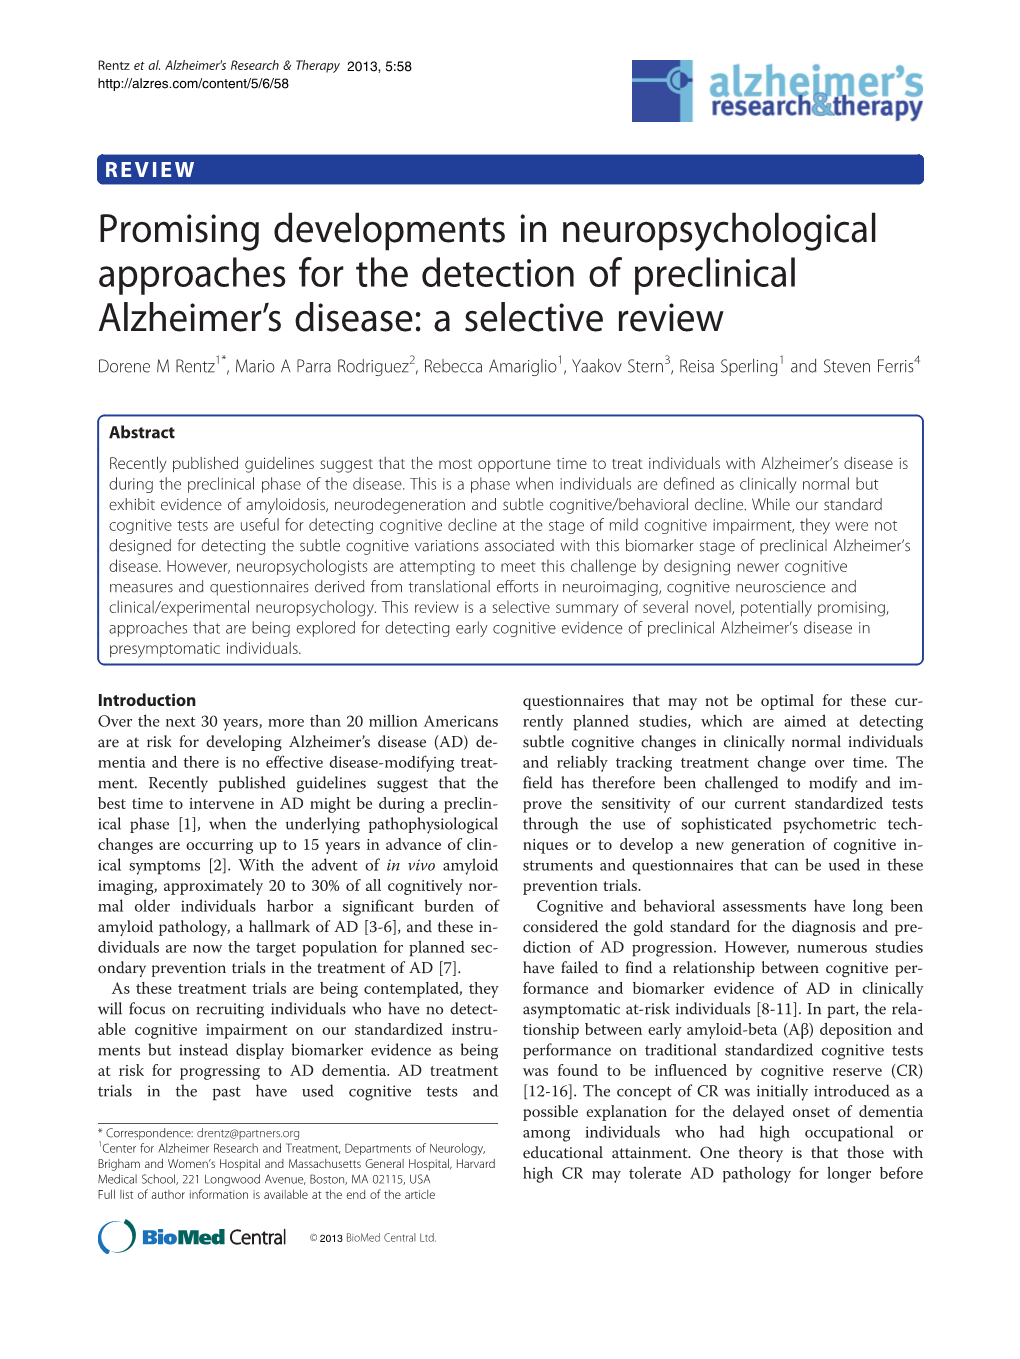 Promising Developments in Neuropsychological Approaches For